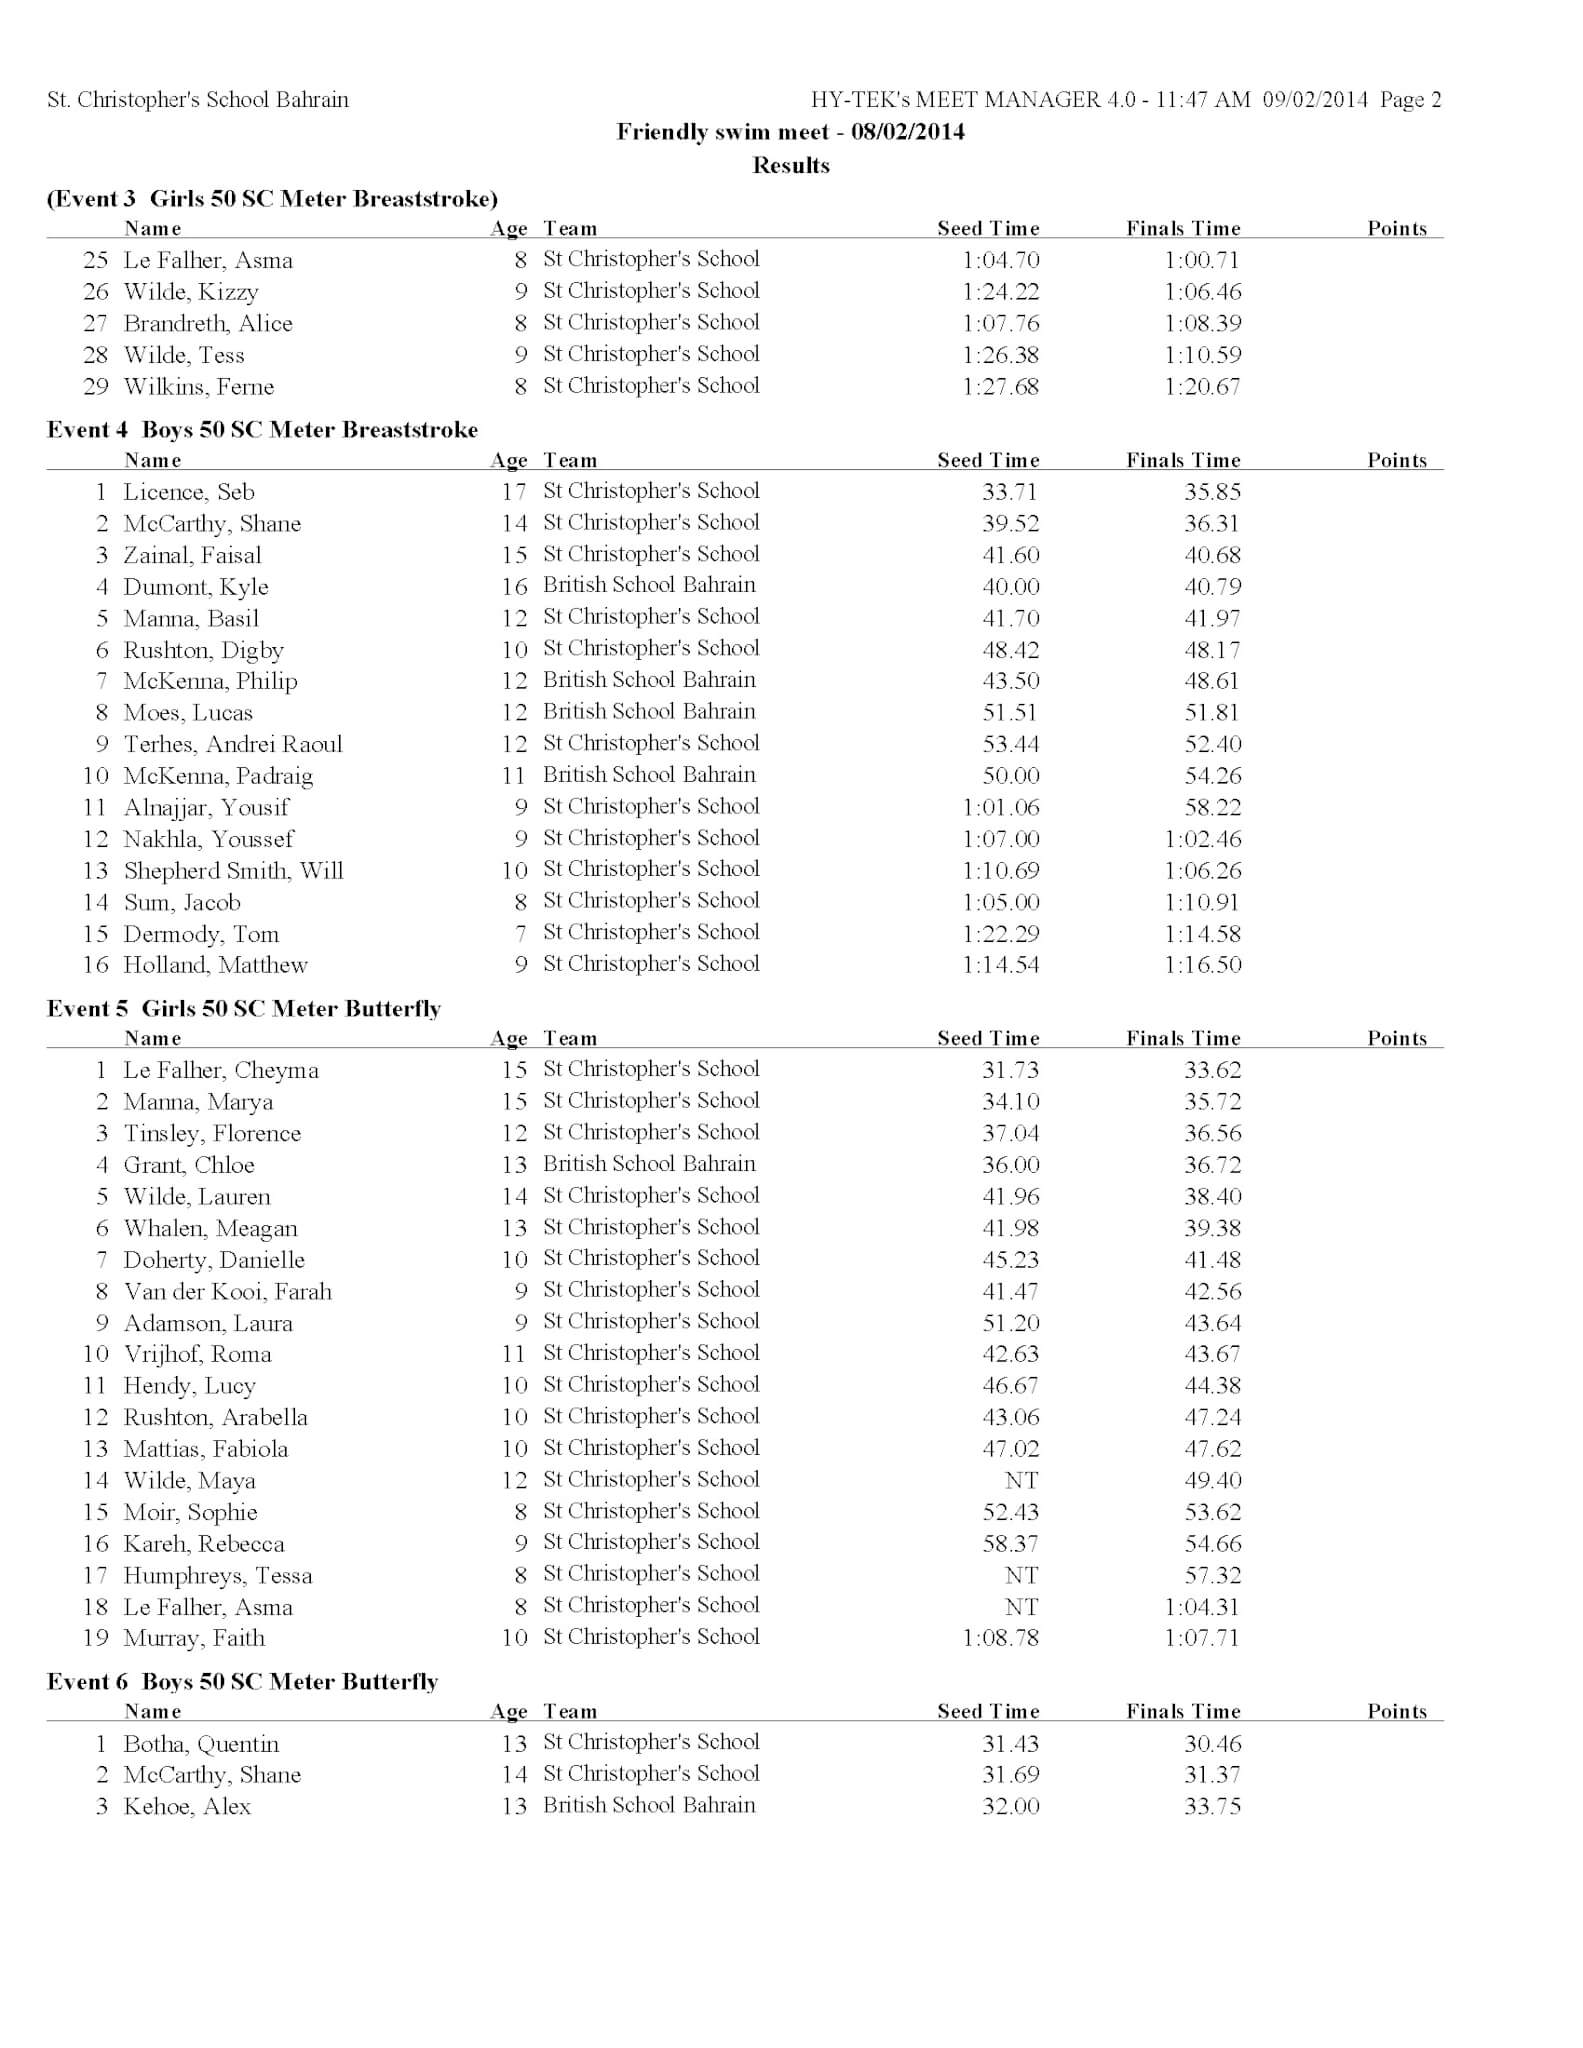 full results1_Page_2